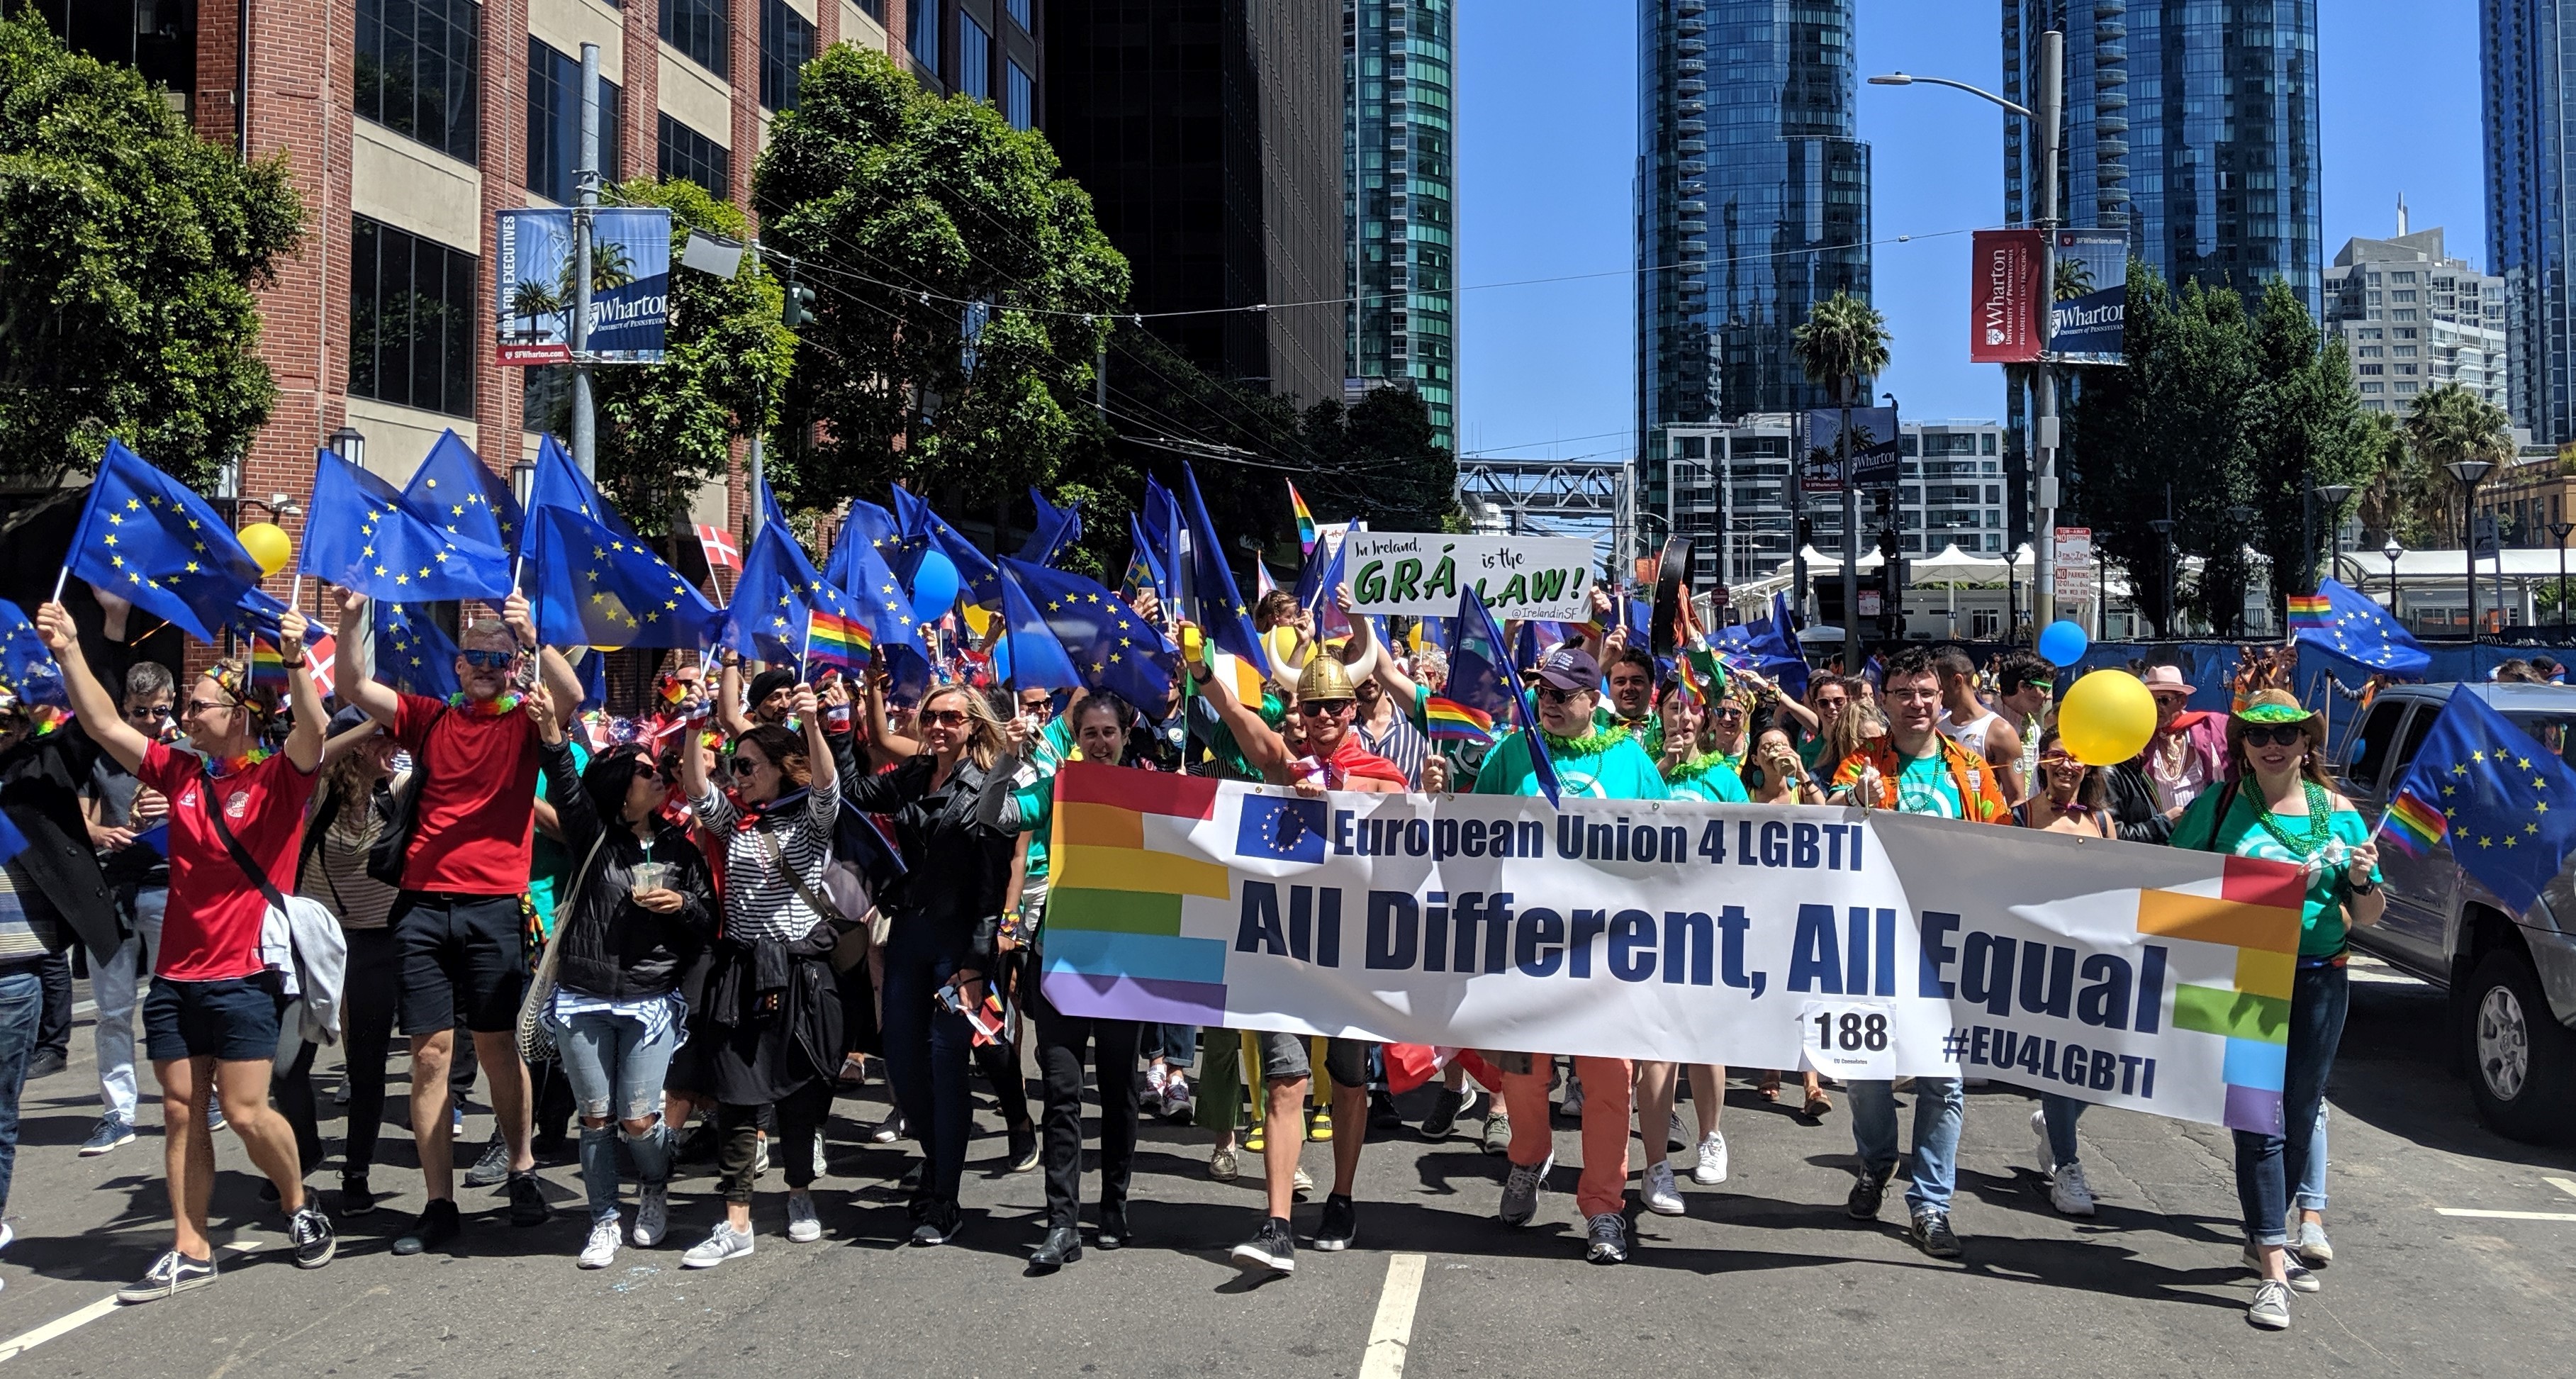 Consulate General of Ireland in San Francisco marching with the European Union for the 2019 San Francisco PRIDE Parade.